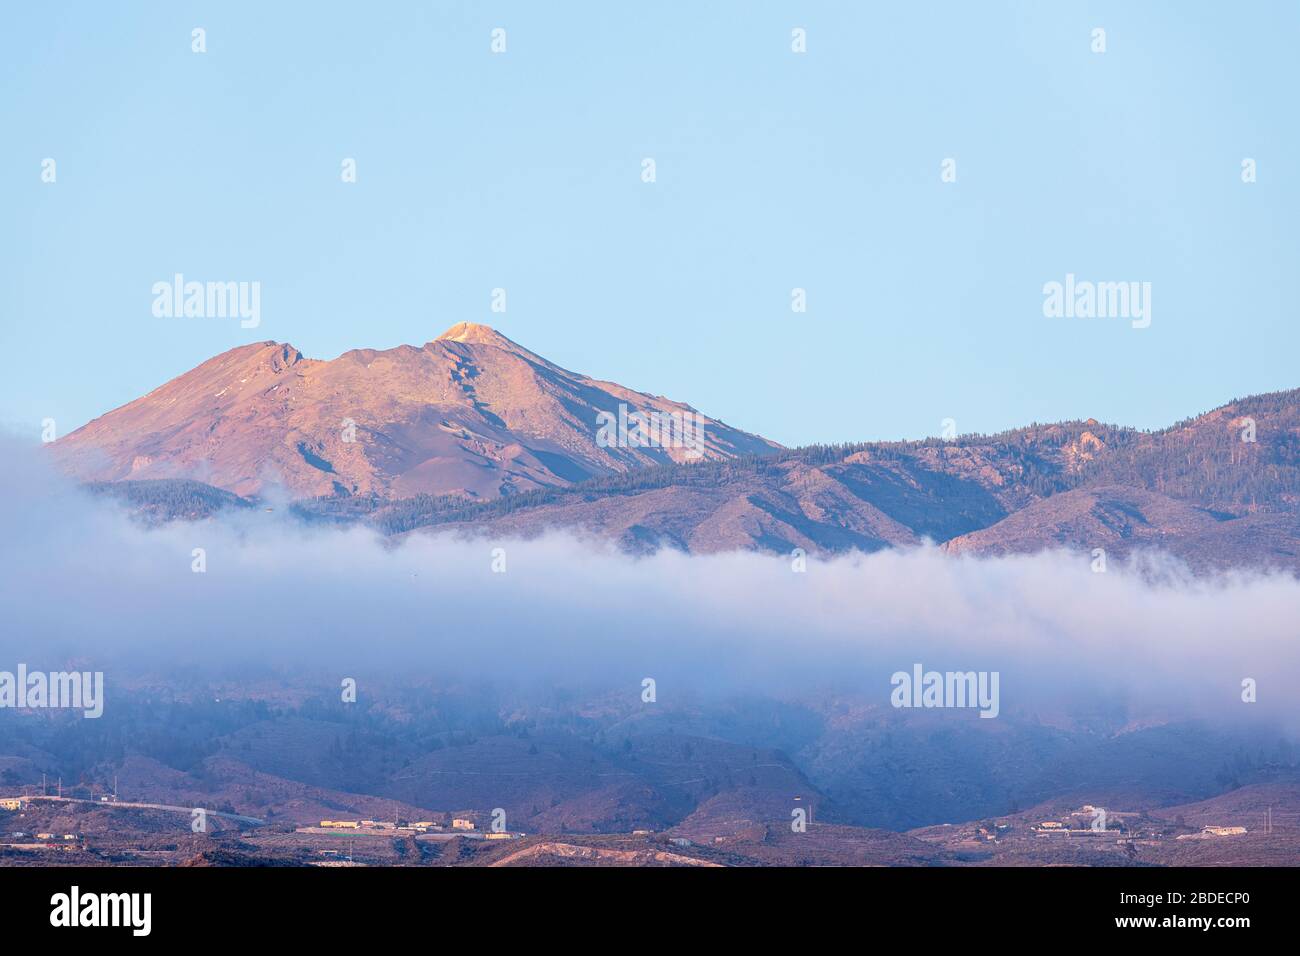 Teide volcano and the Pico Viejo above the cloud, viewed from Playa San Juan, Tenerife, Canary Islands, Spain Stock Photo